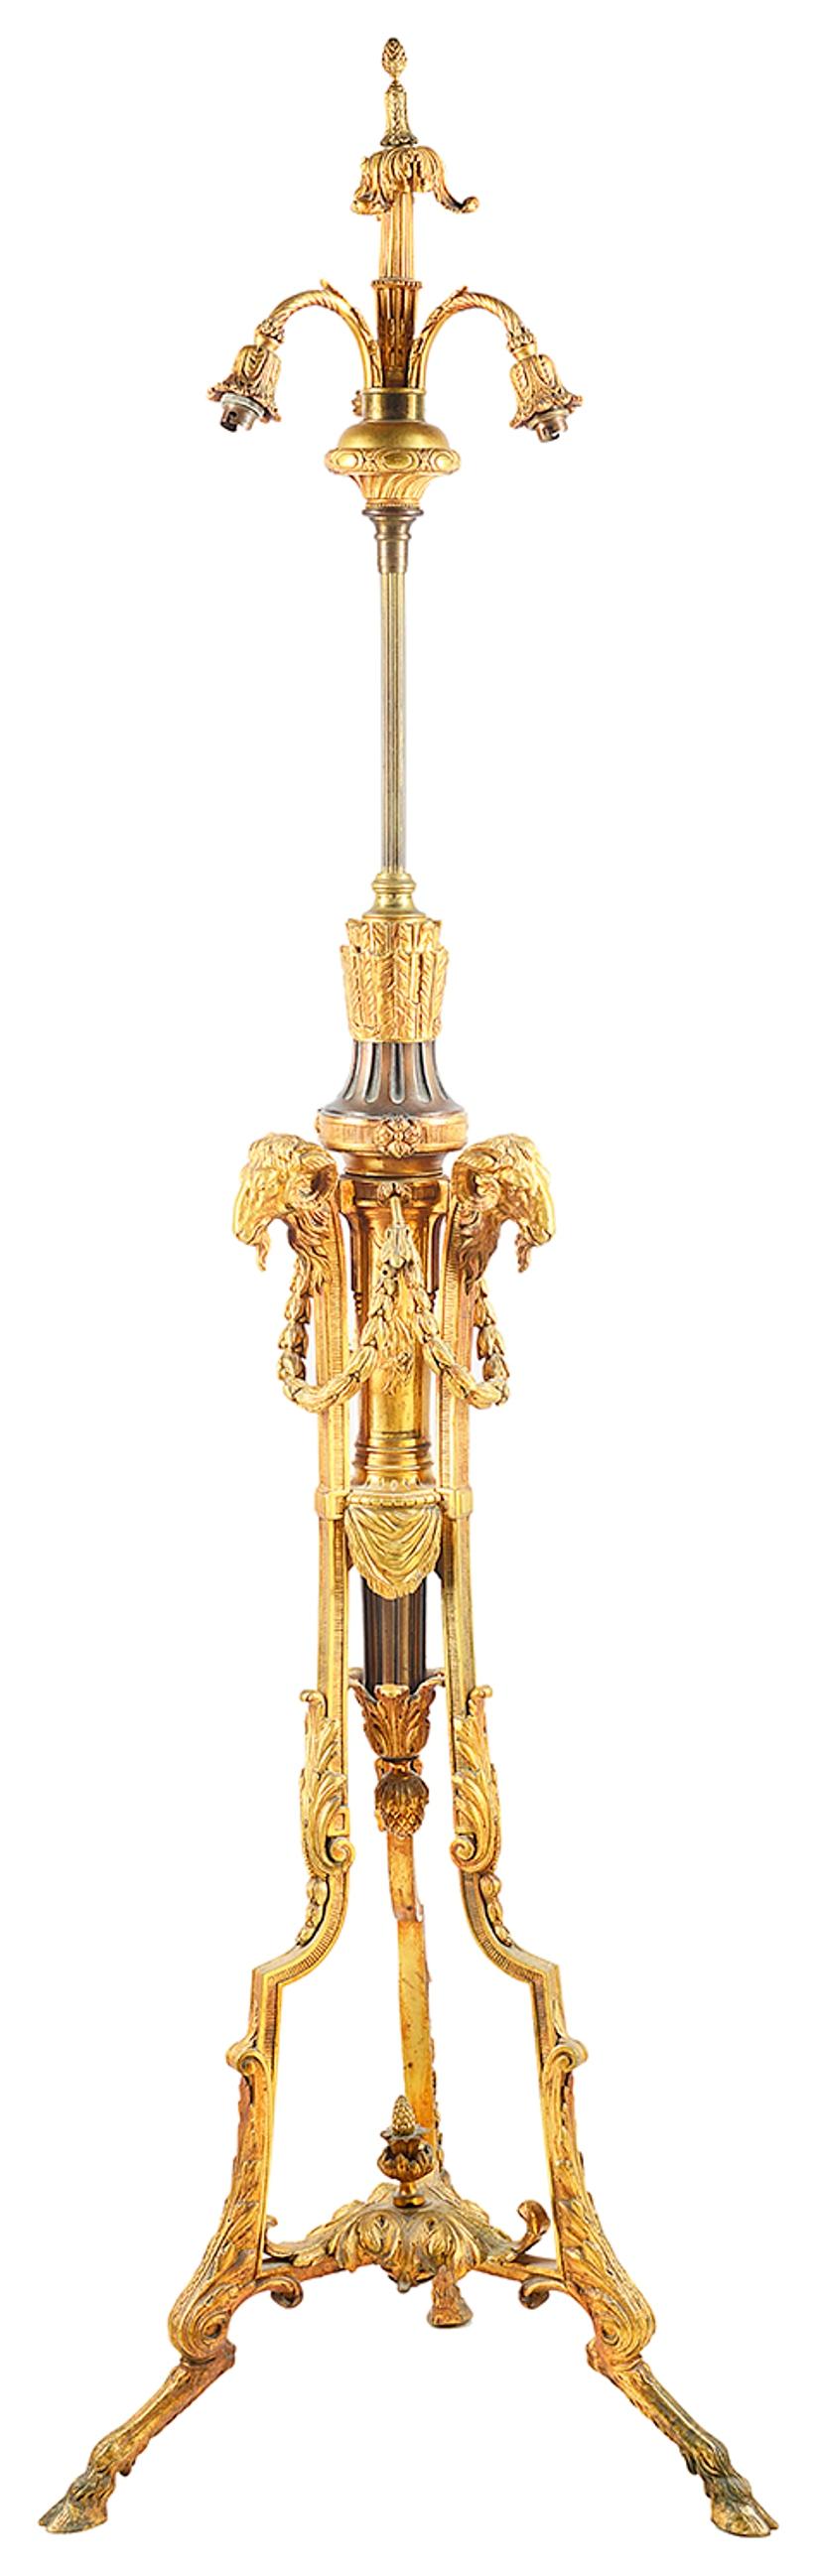 A good quality late 19th century gilded ormolu and bronze standard lamp, having Rams head, swag, and scrolling foliate mounts, terminating in hoof feet.